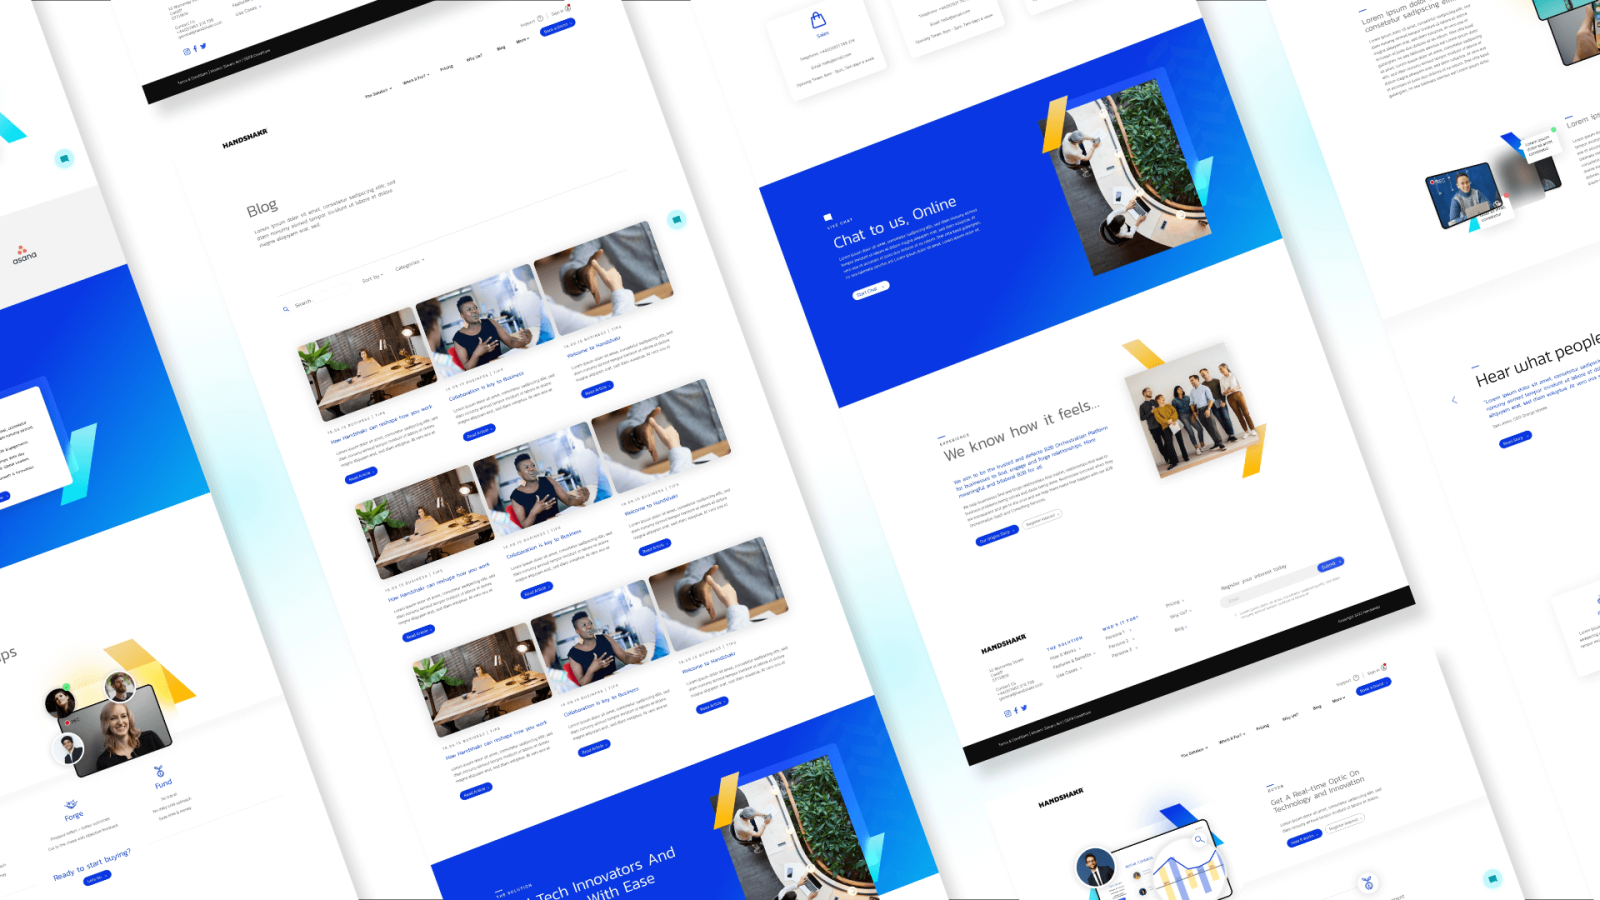 A collage of various website interface designs in blue and white, showcasing layouts for blogs, profiles, and articles for a Design Agency UK.